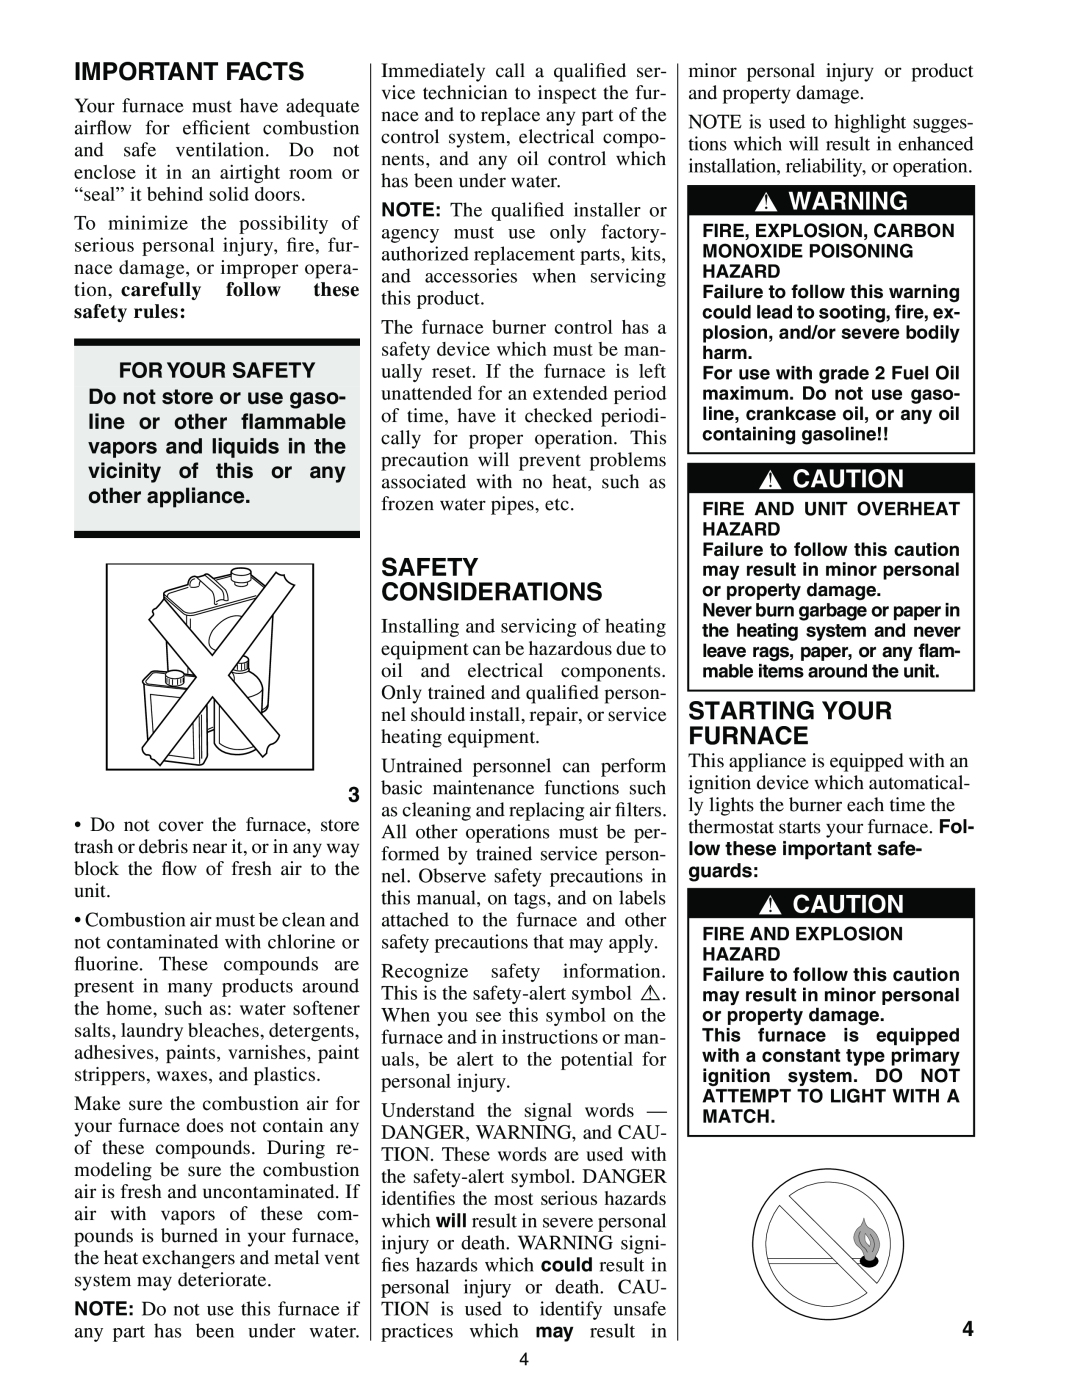 Bryant 367AAN manual Important Facts, Safety Considerations, For Your Safety 